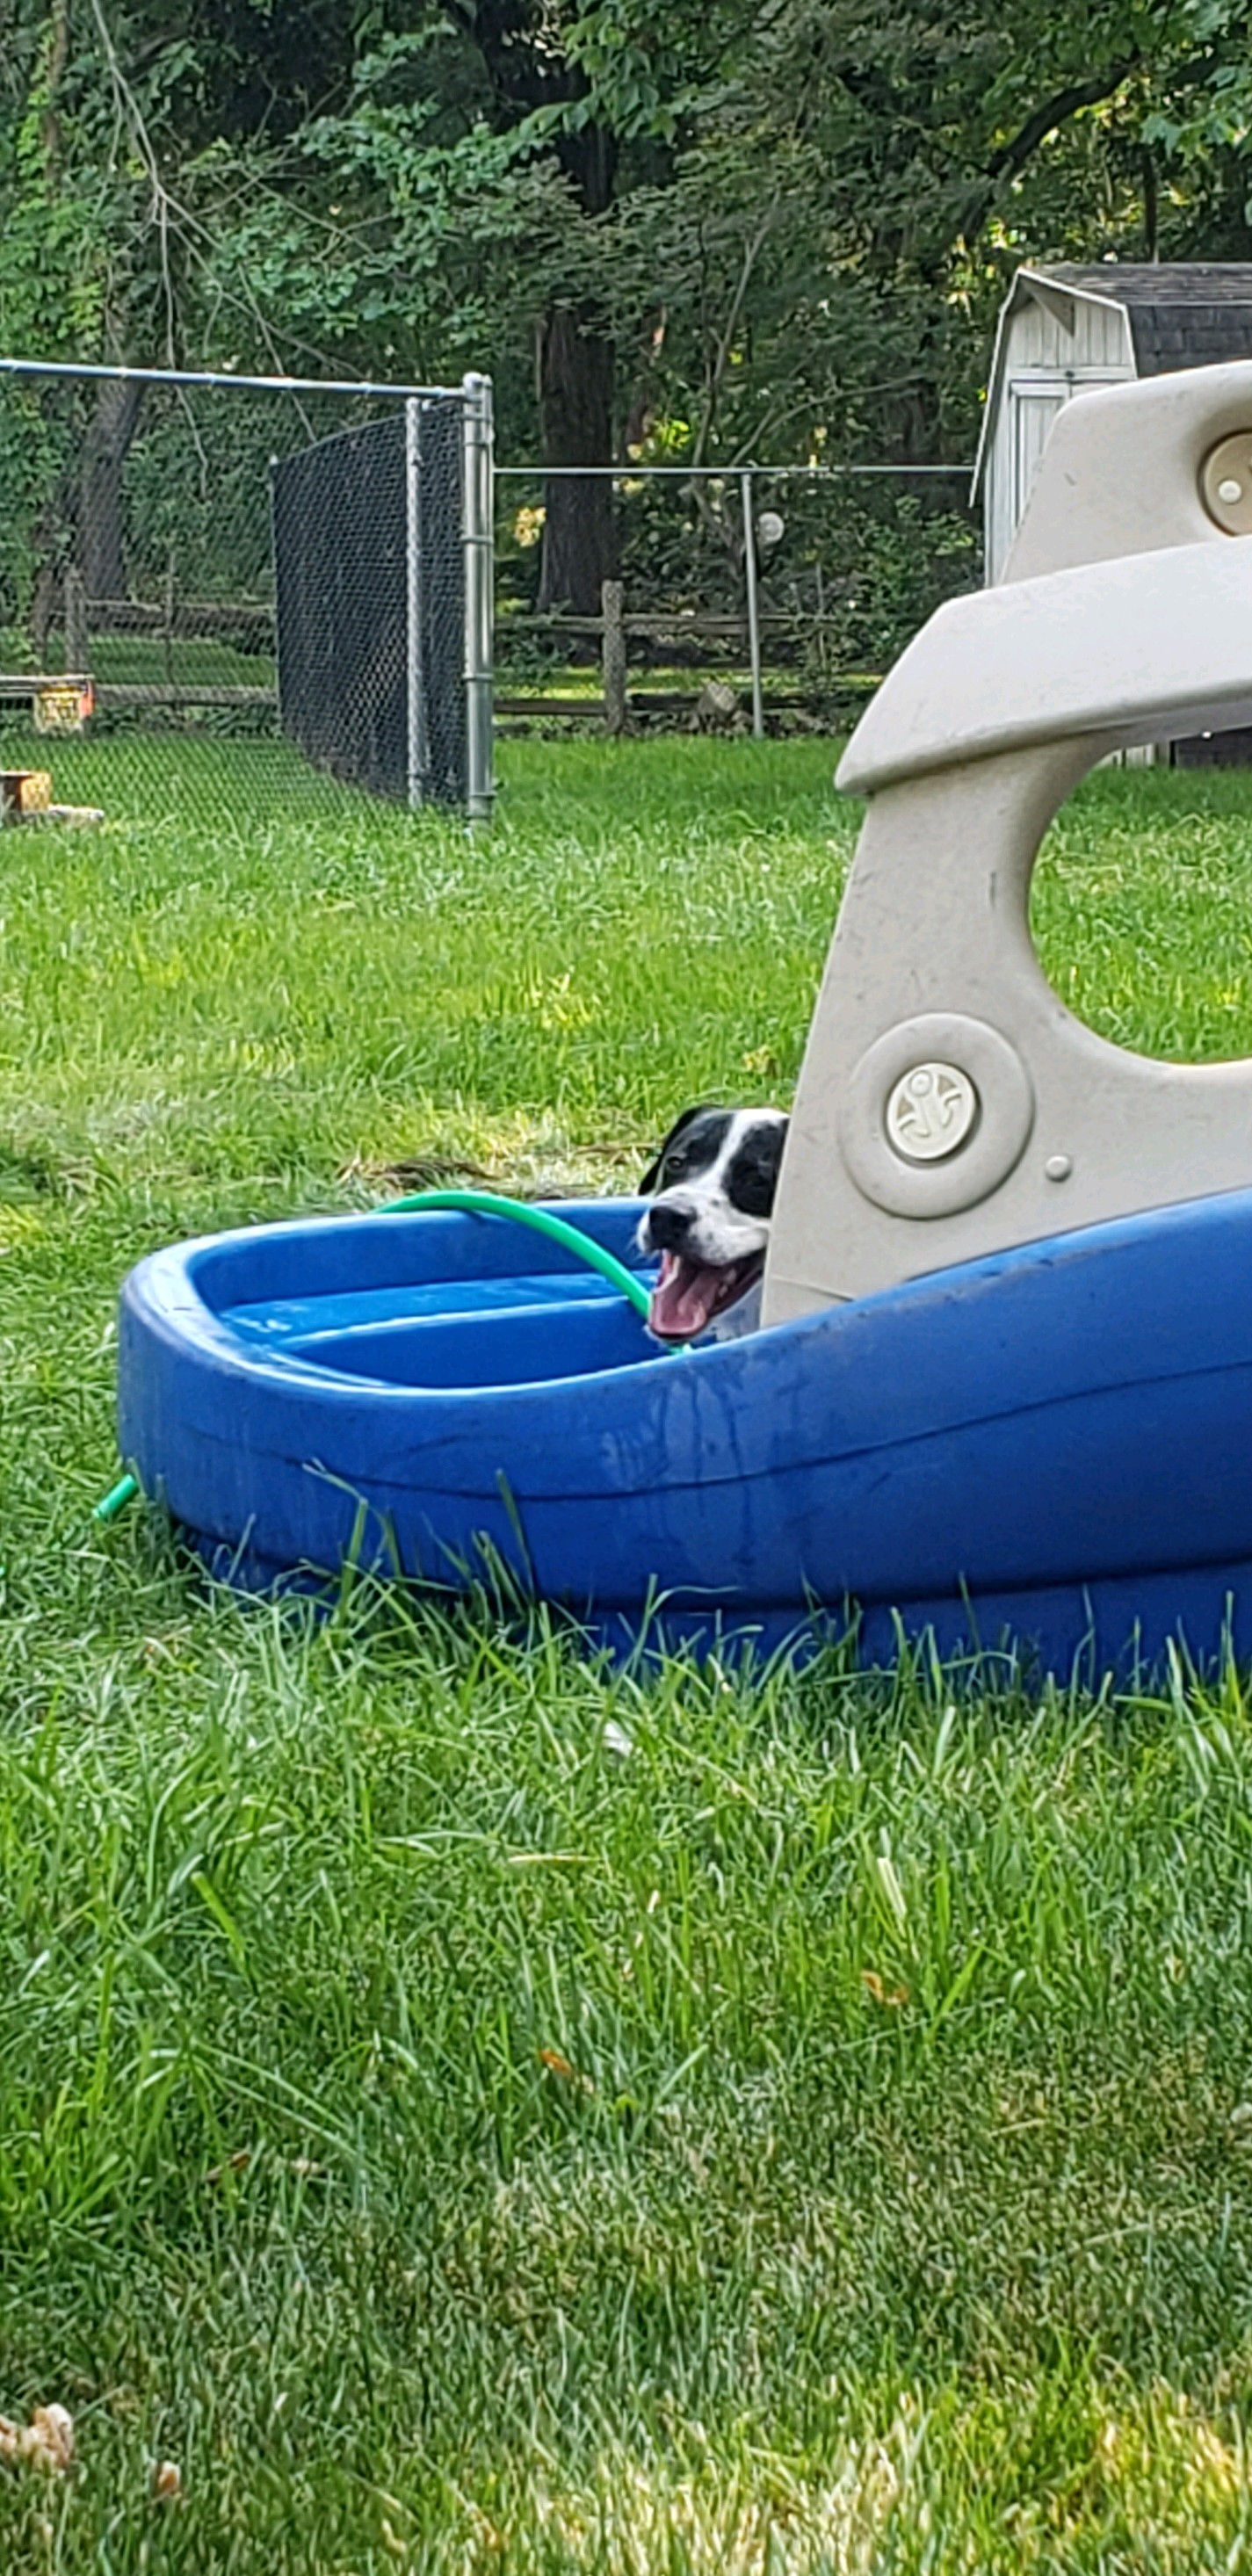 Milo enjoying his staycation in the pool!